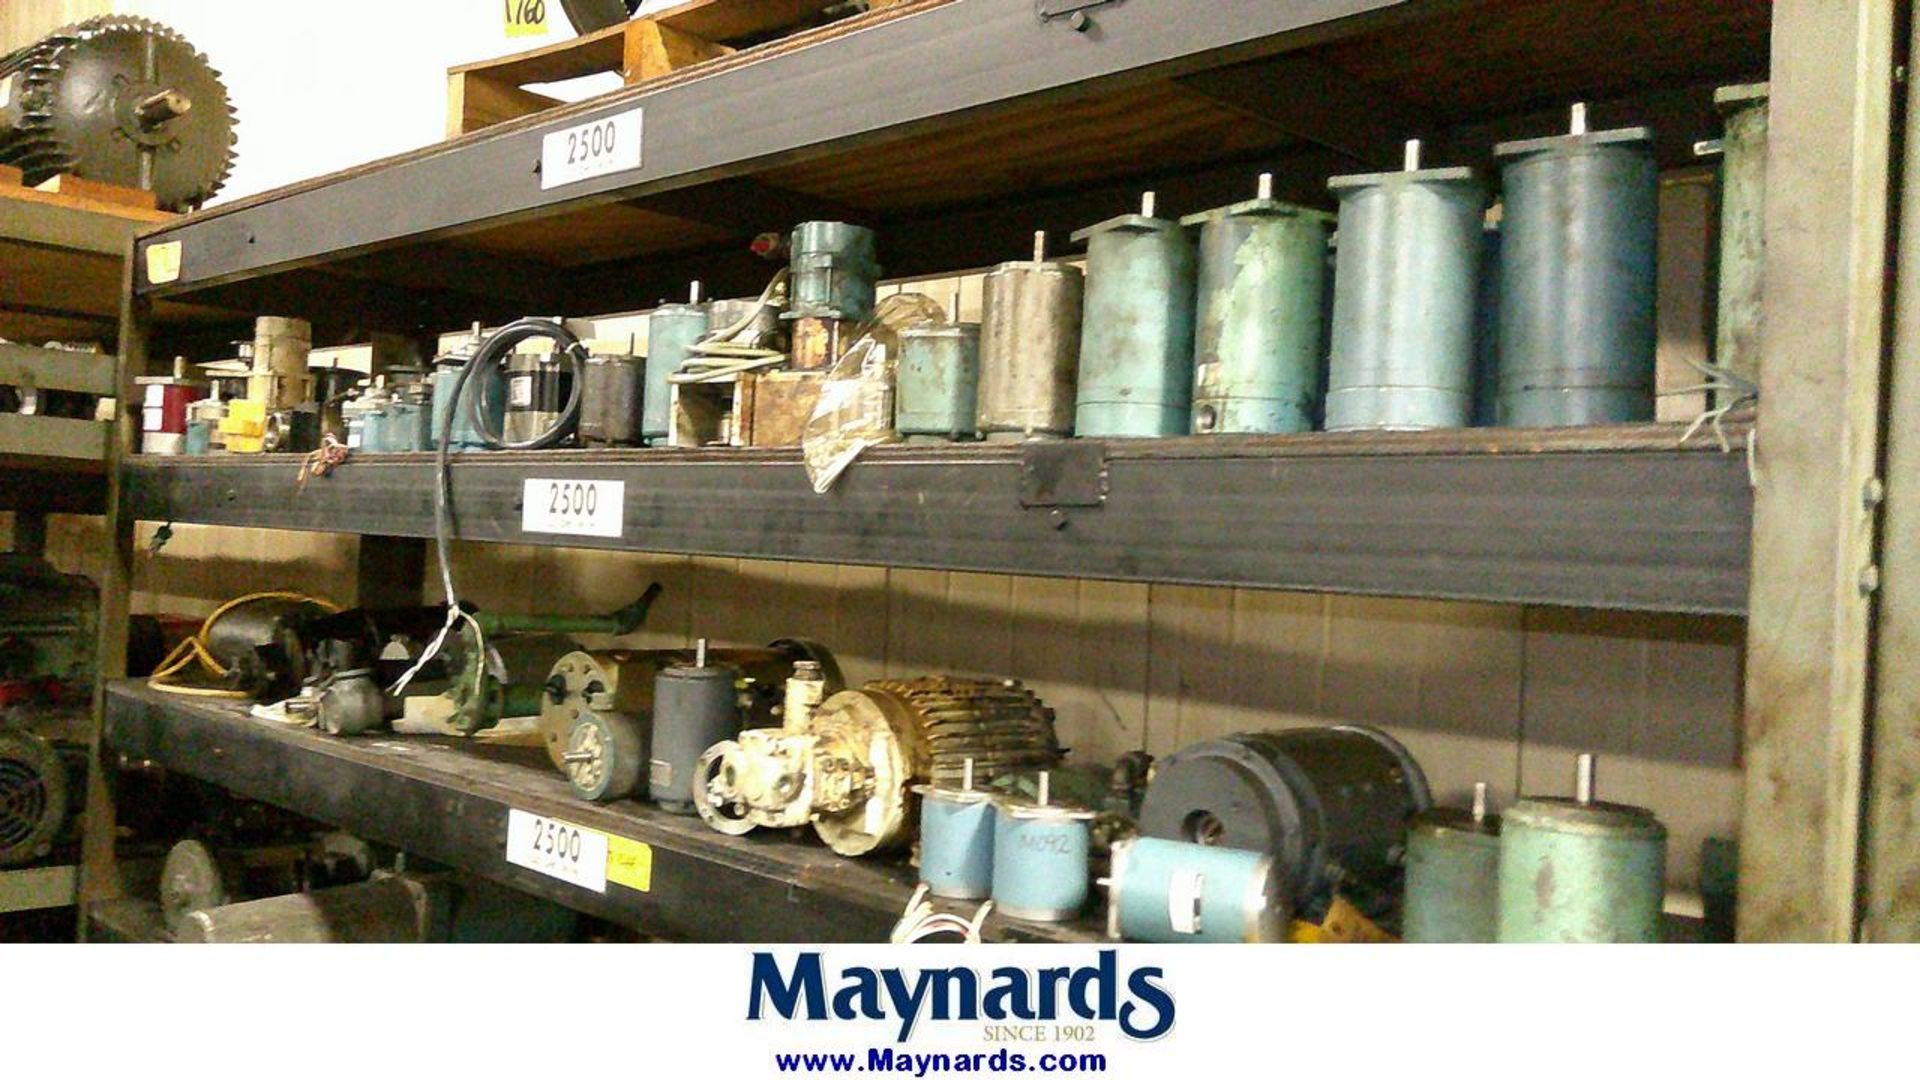 5-Tier Heavy Duty Rack with Remaining Contents of Motors & Centrifugal Pumps - Image 4 of 5